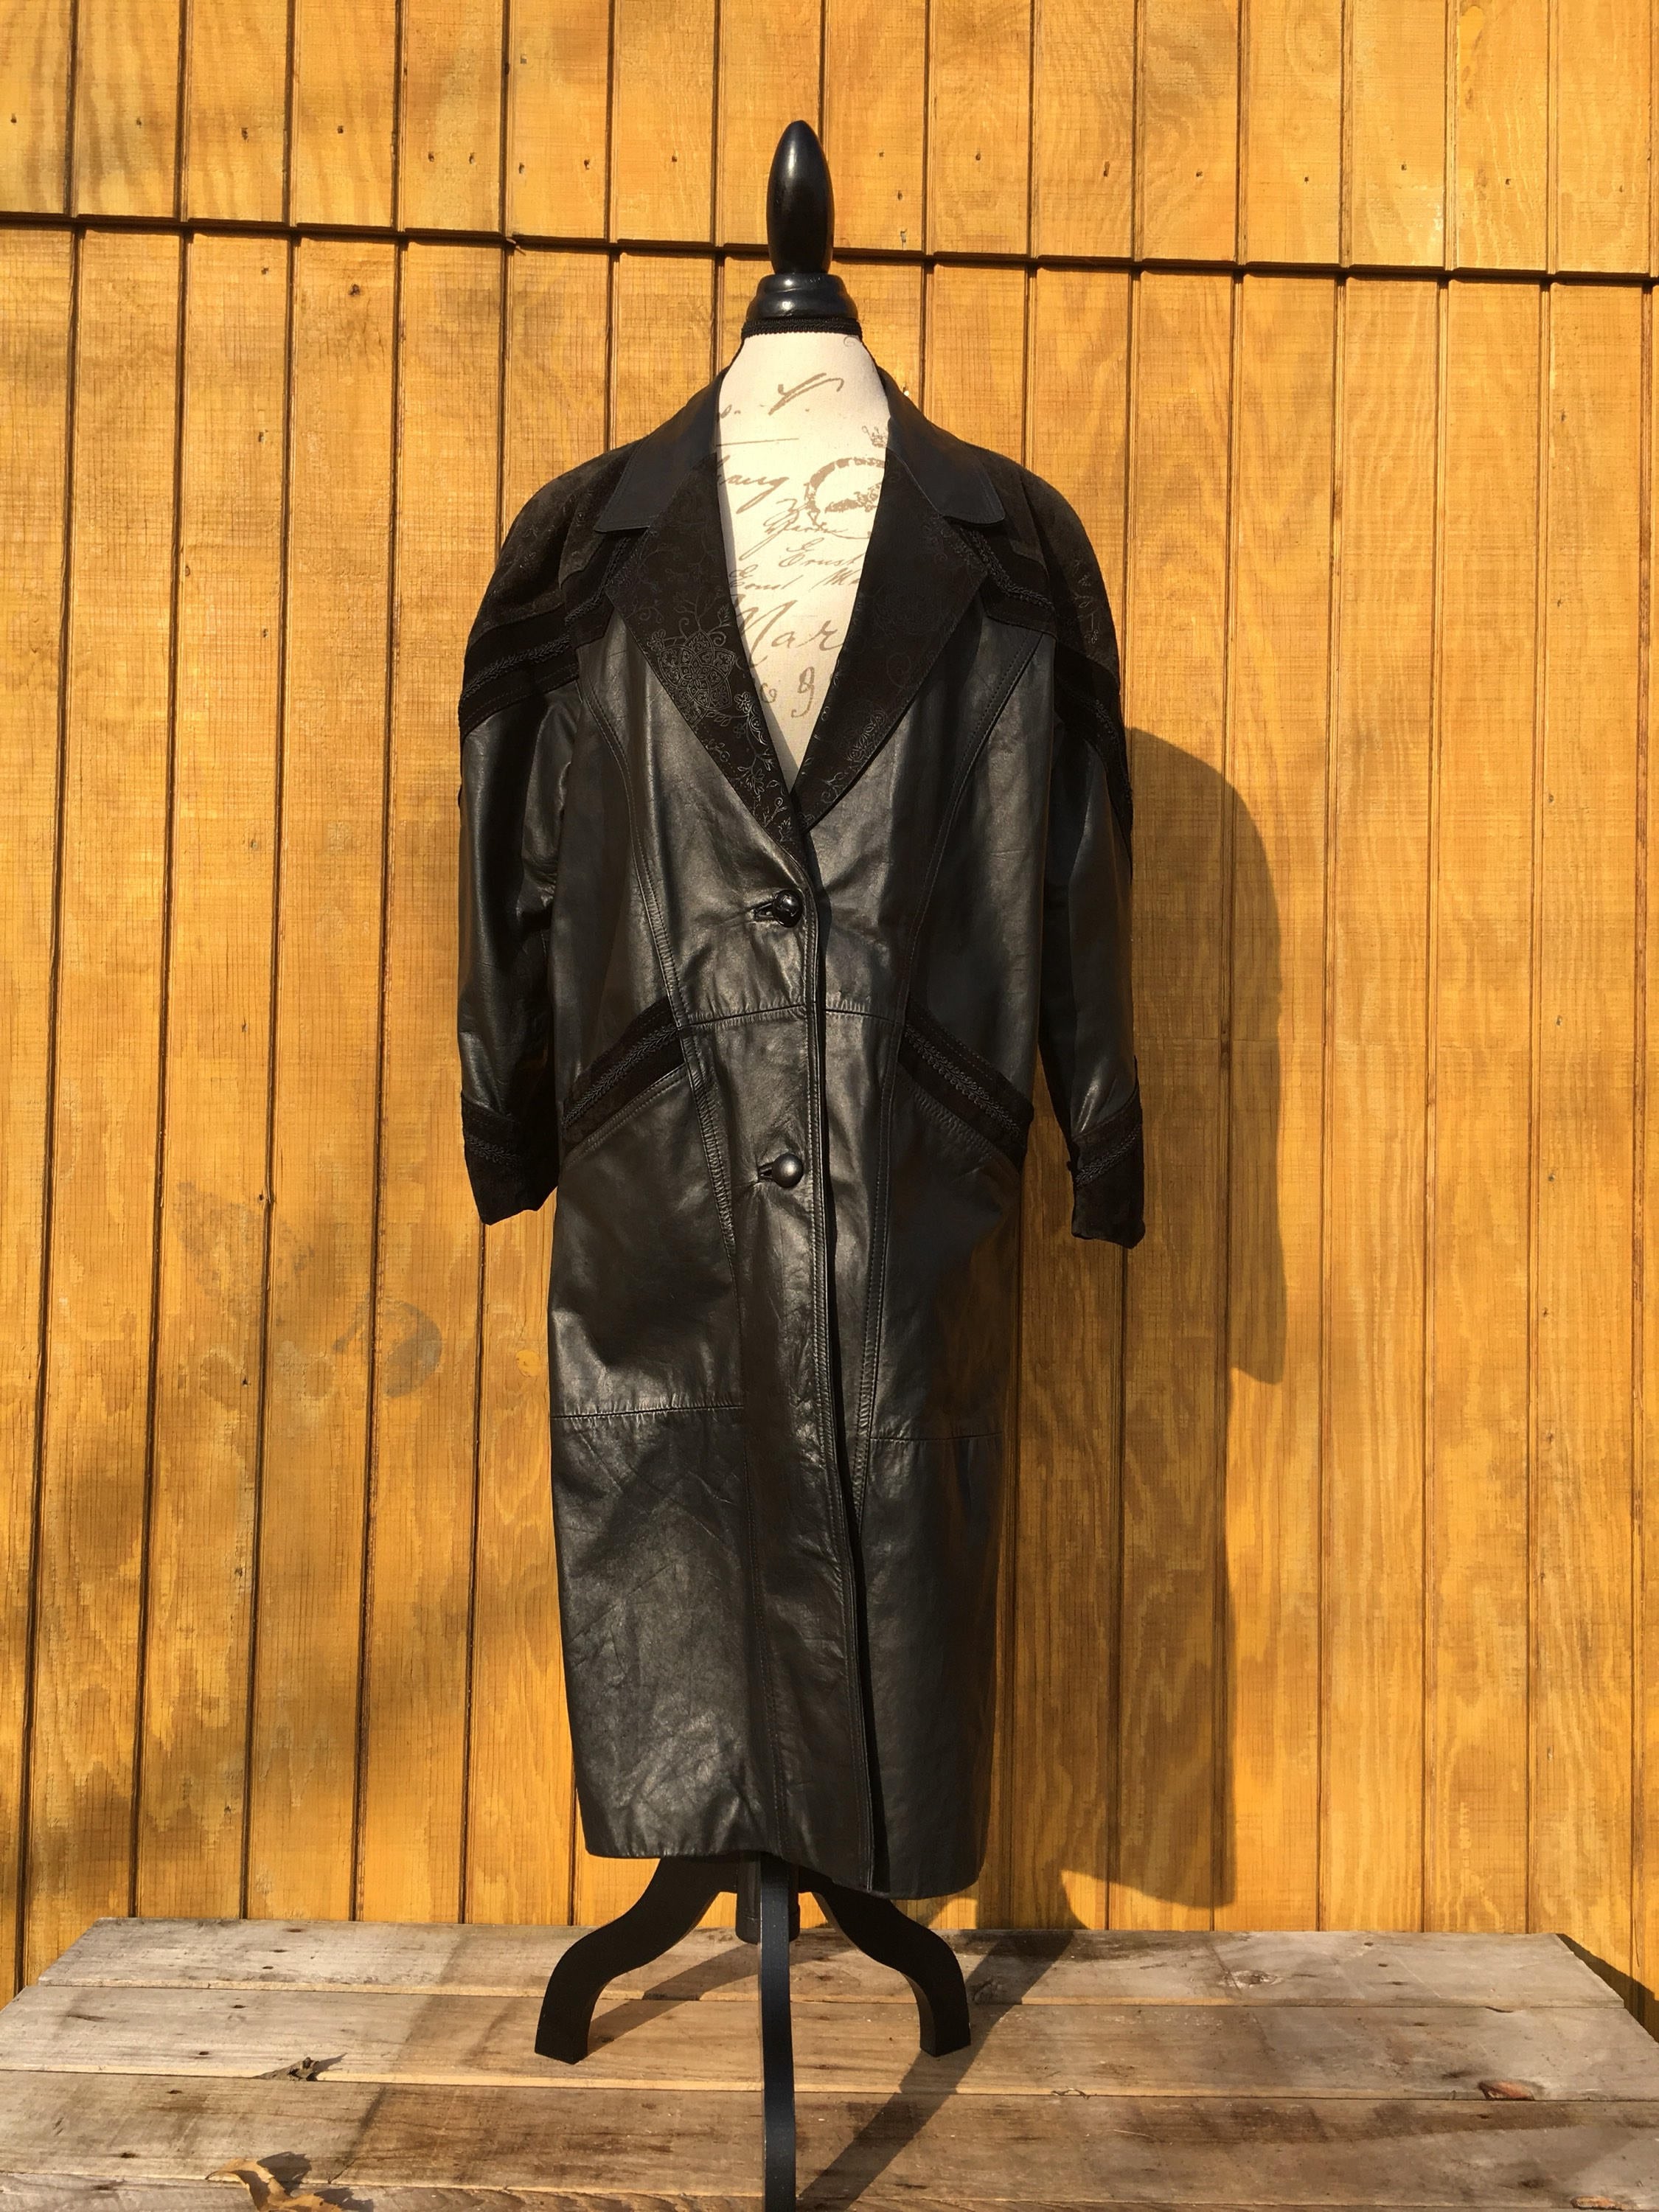 Vintage Leather Trench Coat, Women's Size Petite Small Coat, Laurice ...